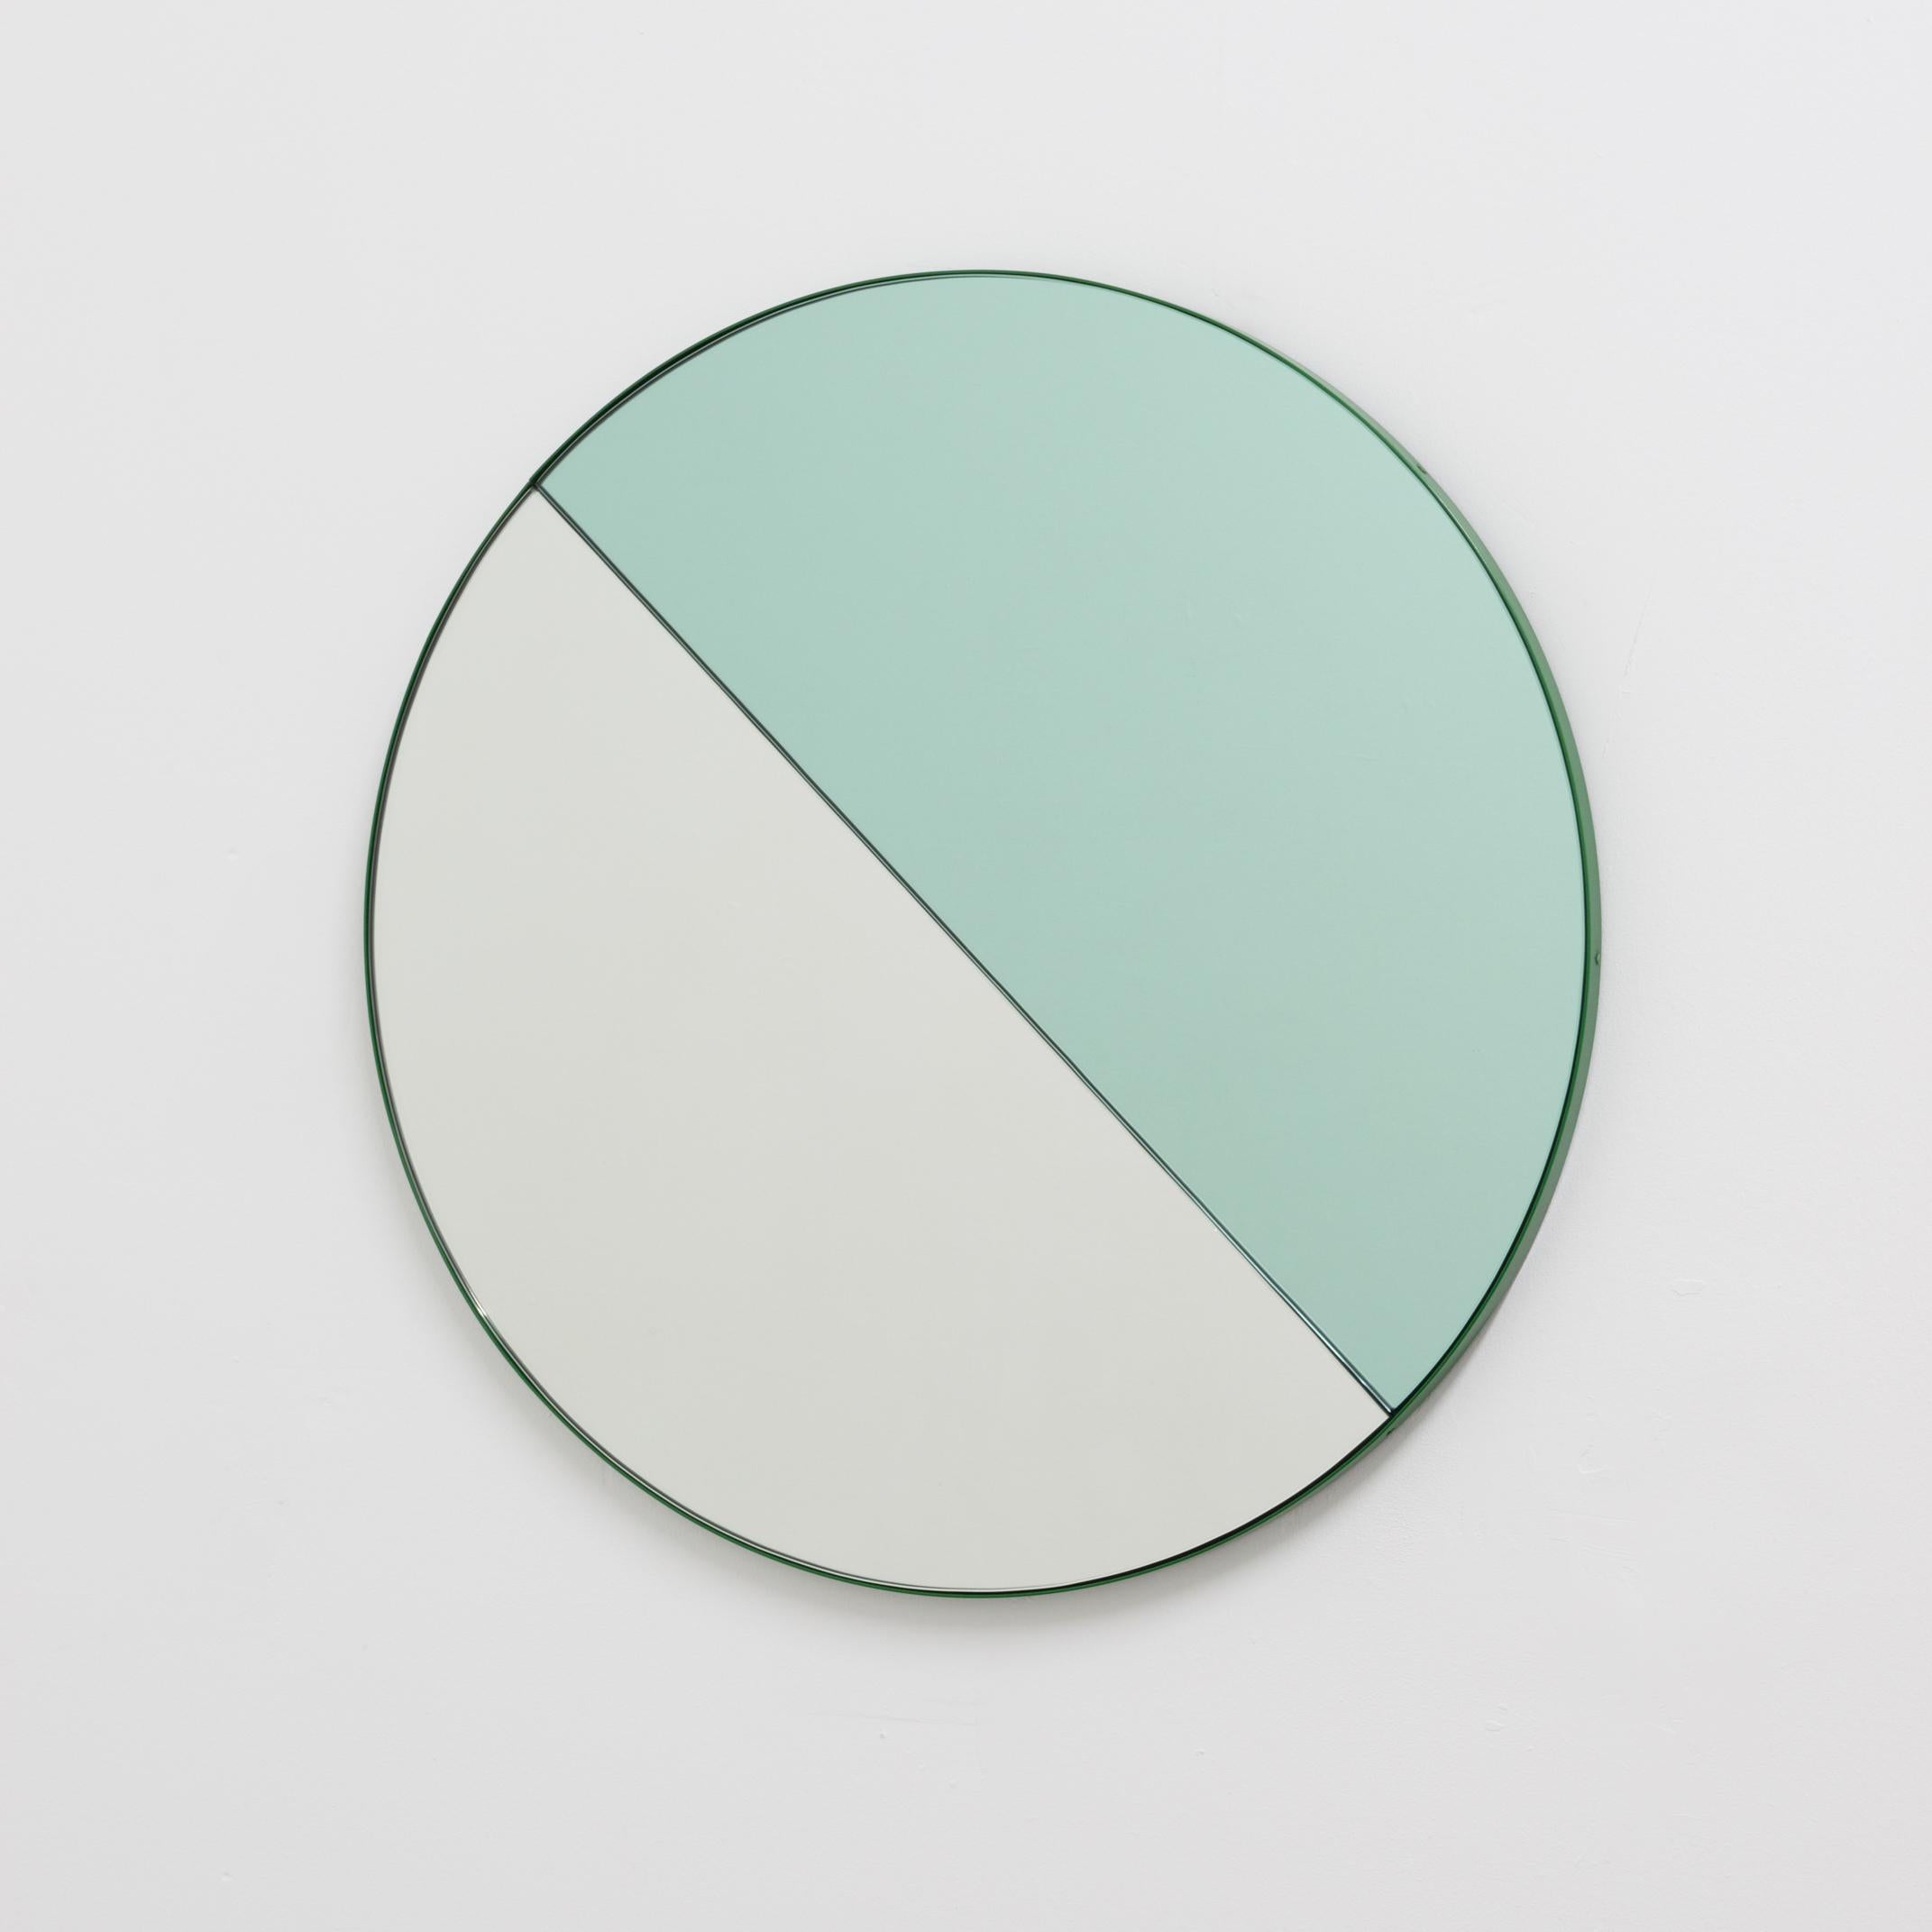 Orbis Dualis Mixed 'Green + Silver' Round Mirror with Green Frame, Small 7